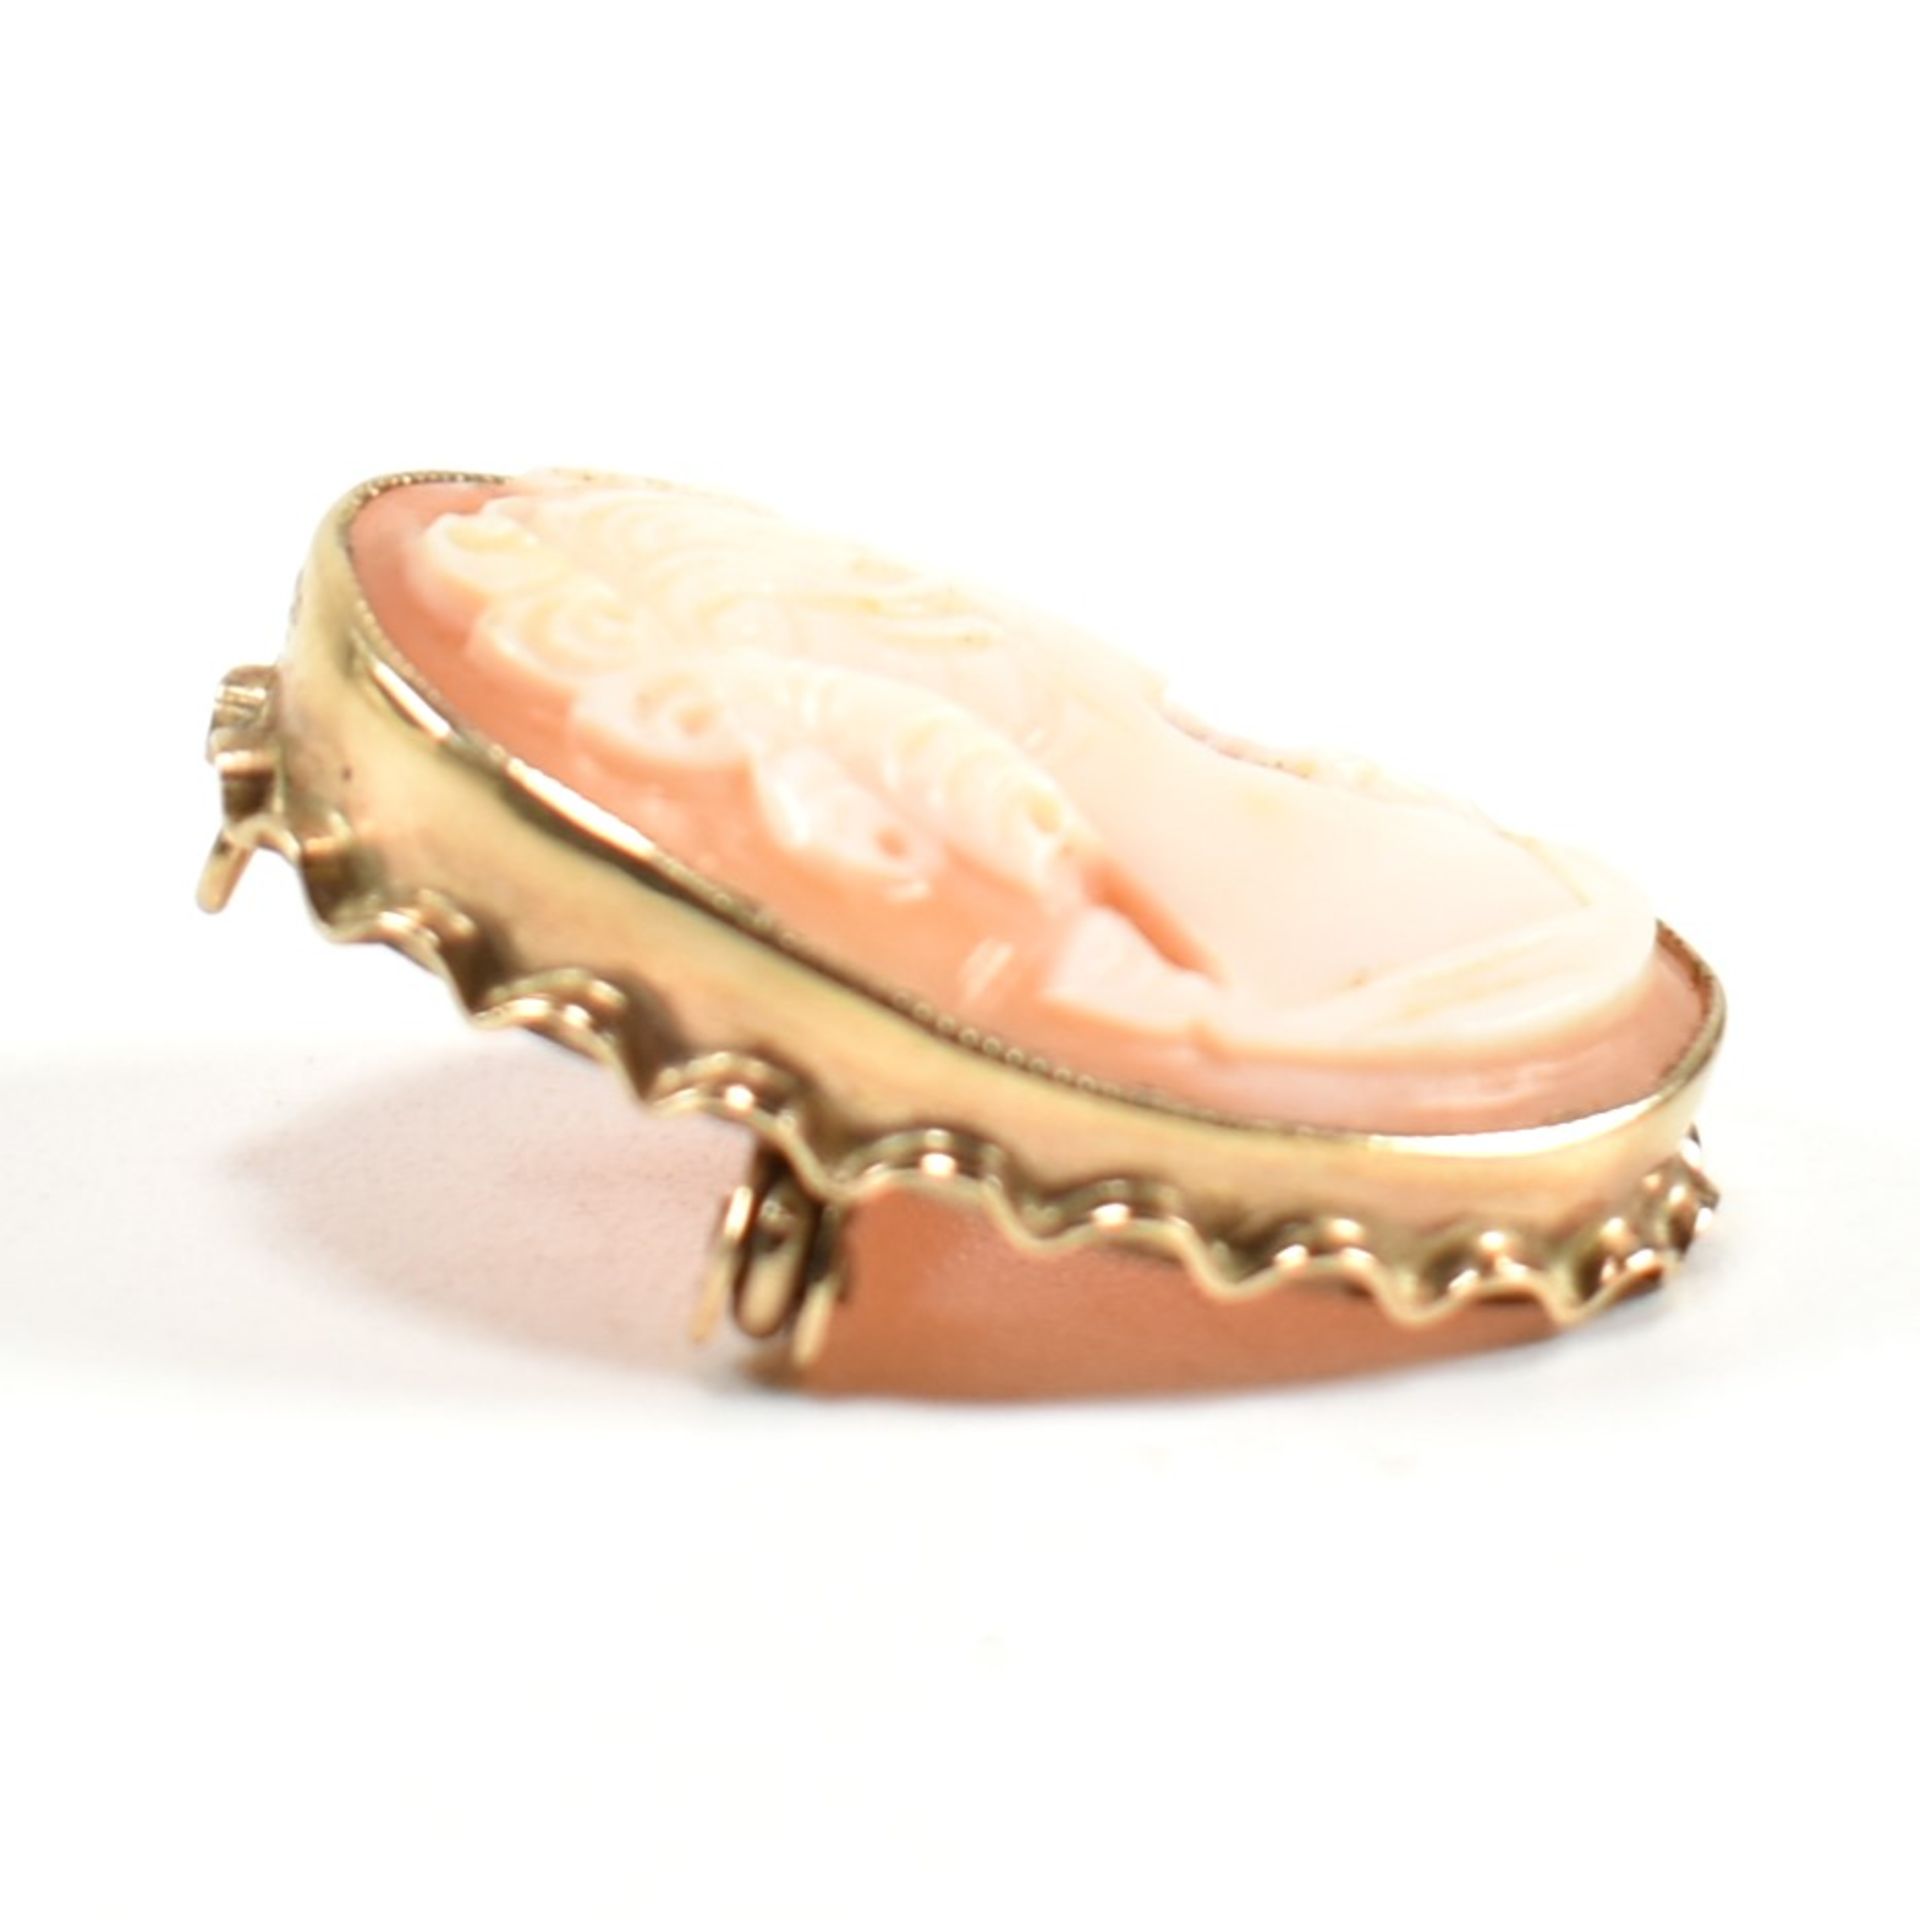 HALLMARKED 9CT GOLD CAMEO BROOCH PIN - Image 4 of 4